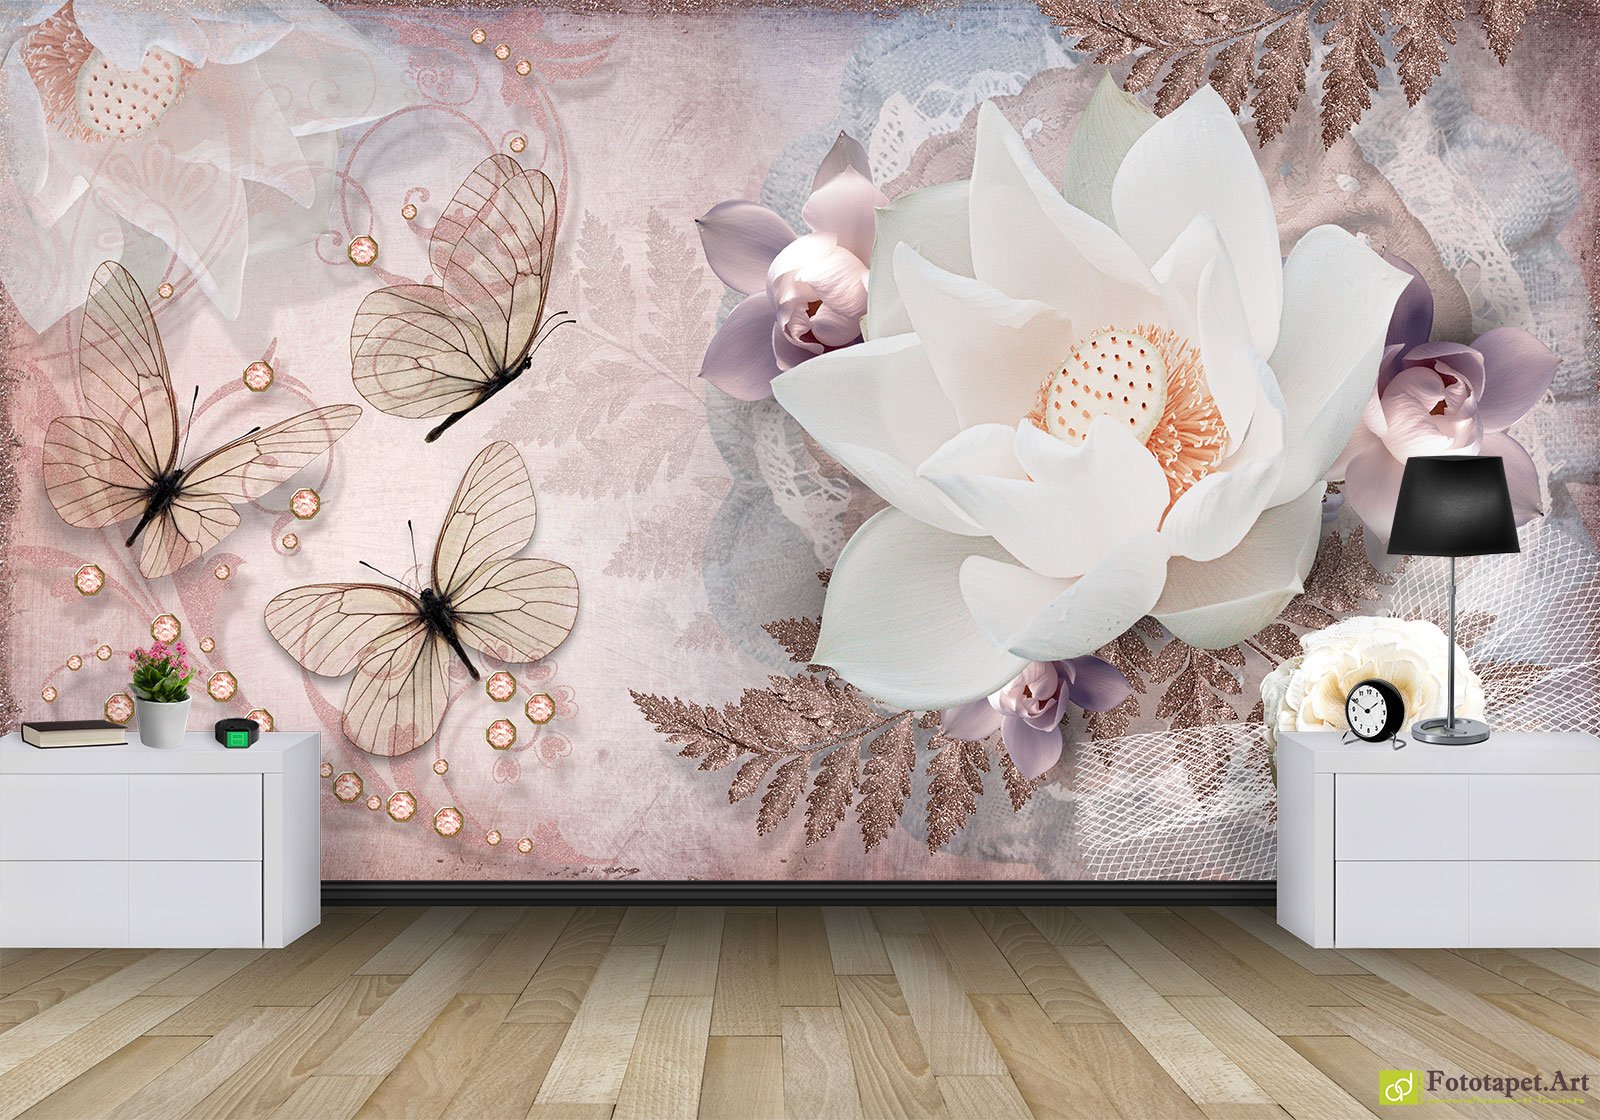 Retro Wallpaper Vintage Wall Murals - Floral wallpaper_3  Online Buy Wholesale 3d wallpaper walls and Vintage Wall Murals for your  rooms